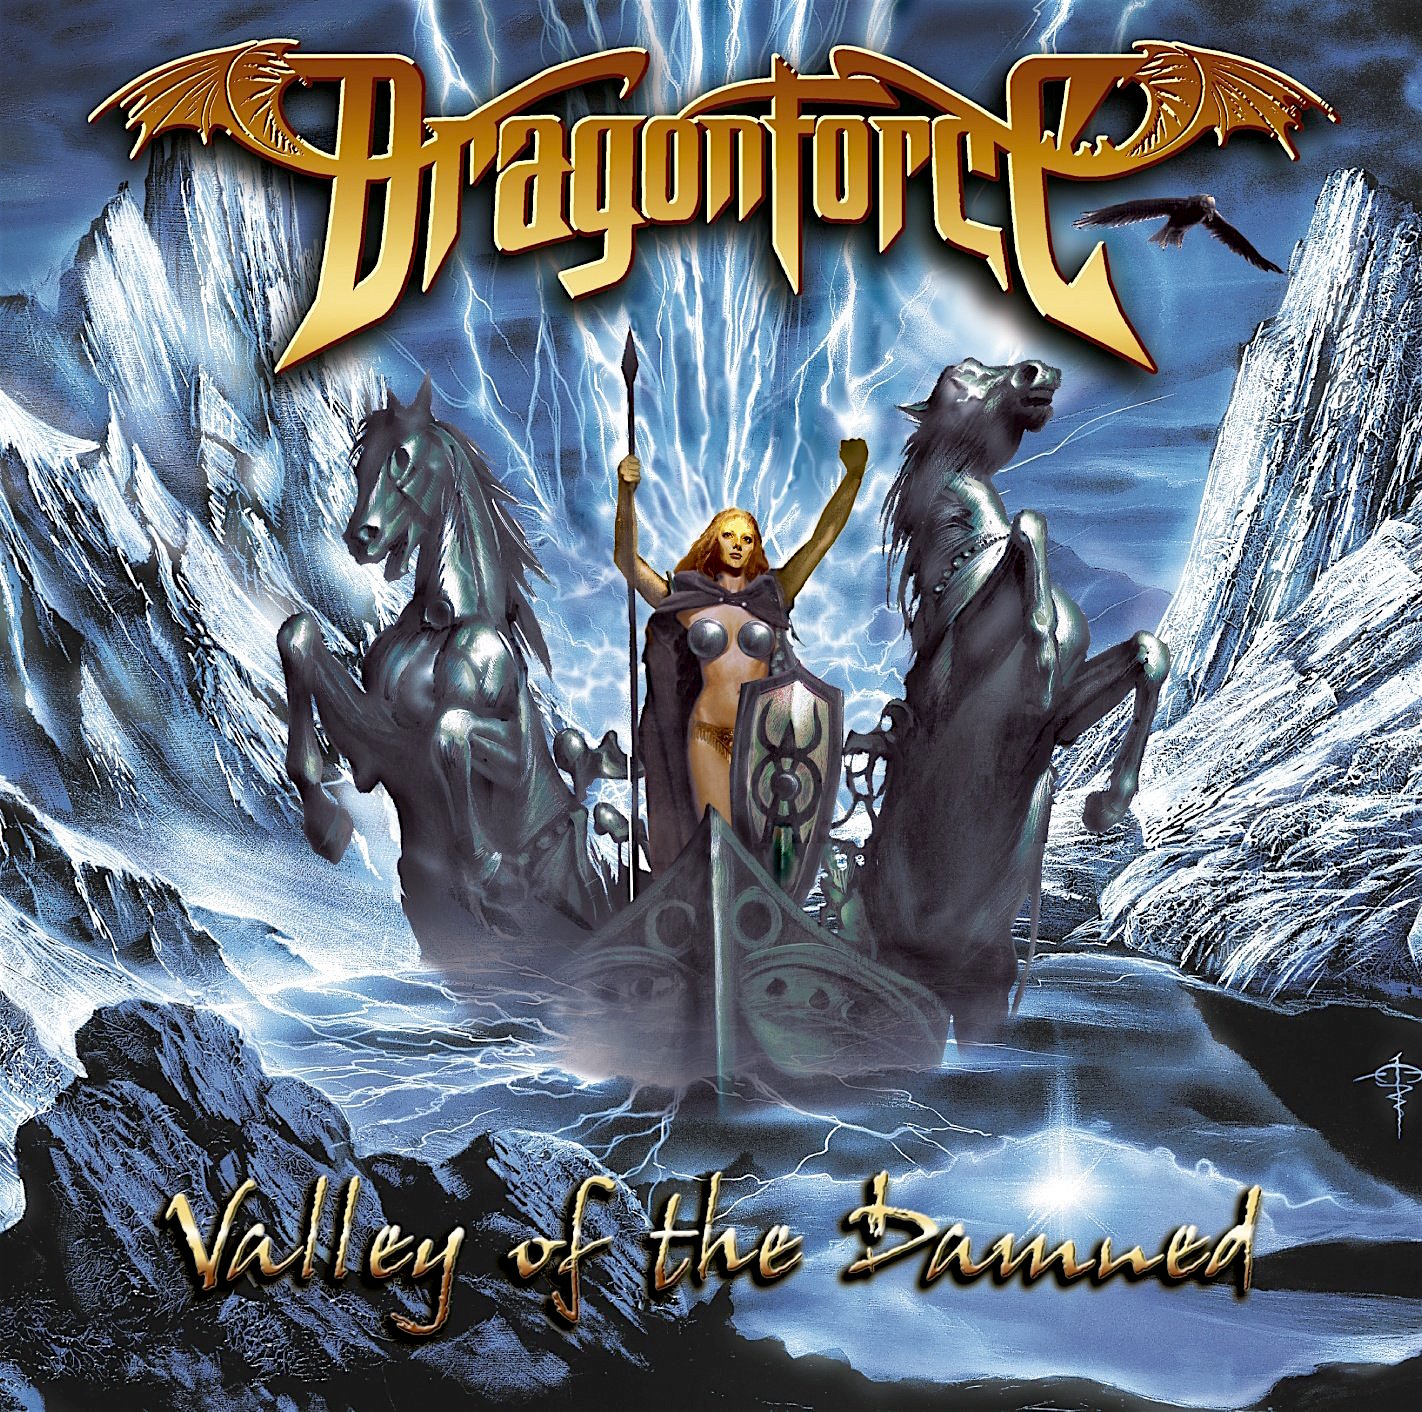 http://www.metalmusicarchives.com/images/covers/dragonforce-valley-of-the-damned-20160615065534.jpg